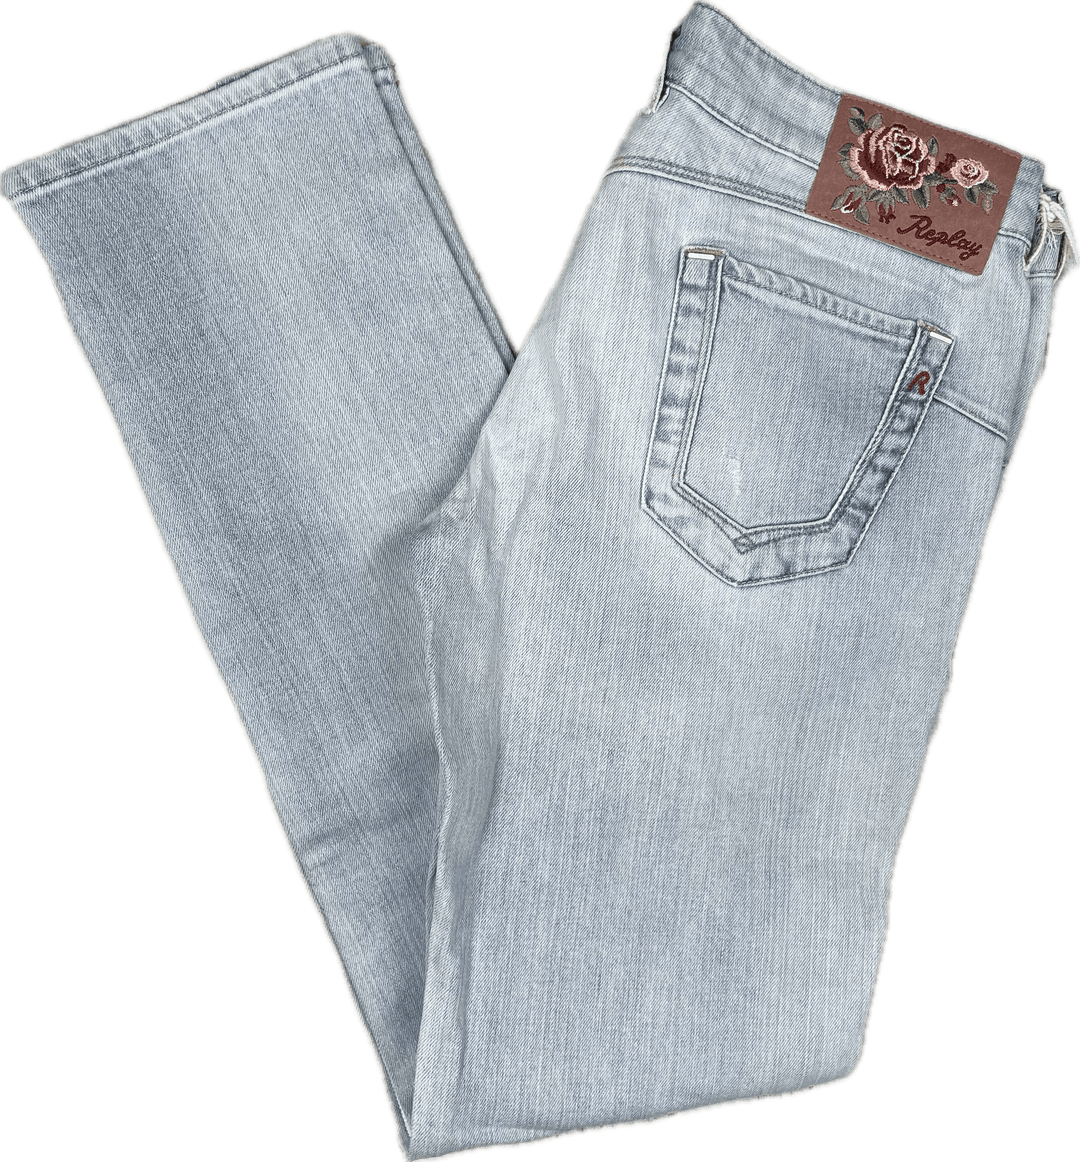 NWT - Replay Italy Ladies 'Radixes' Rose Label Straight Jeans RRP $353.00- Size 33 - Jean Pool